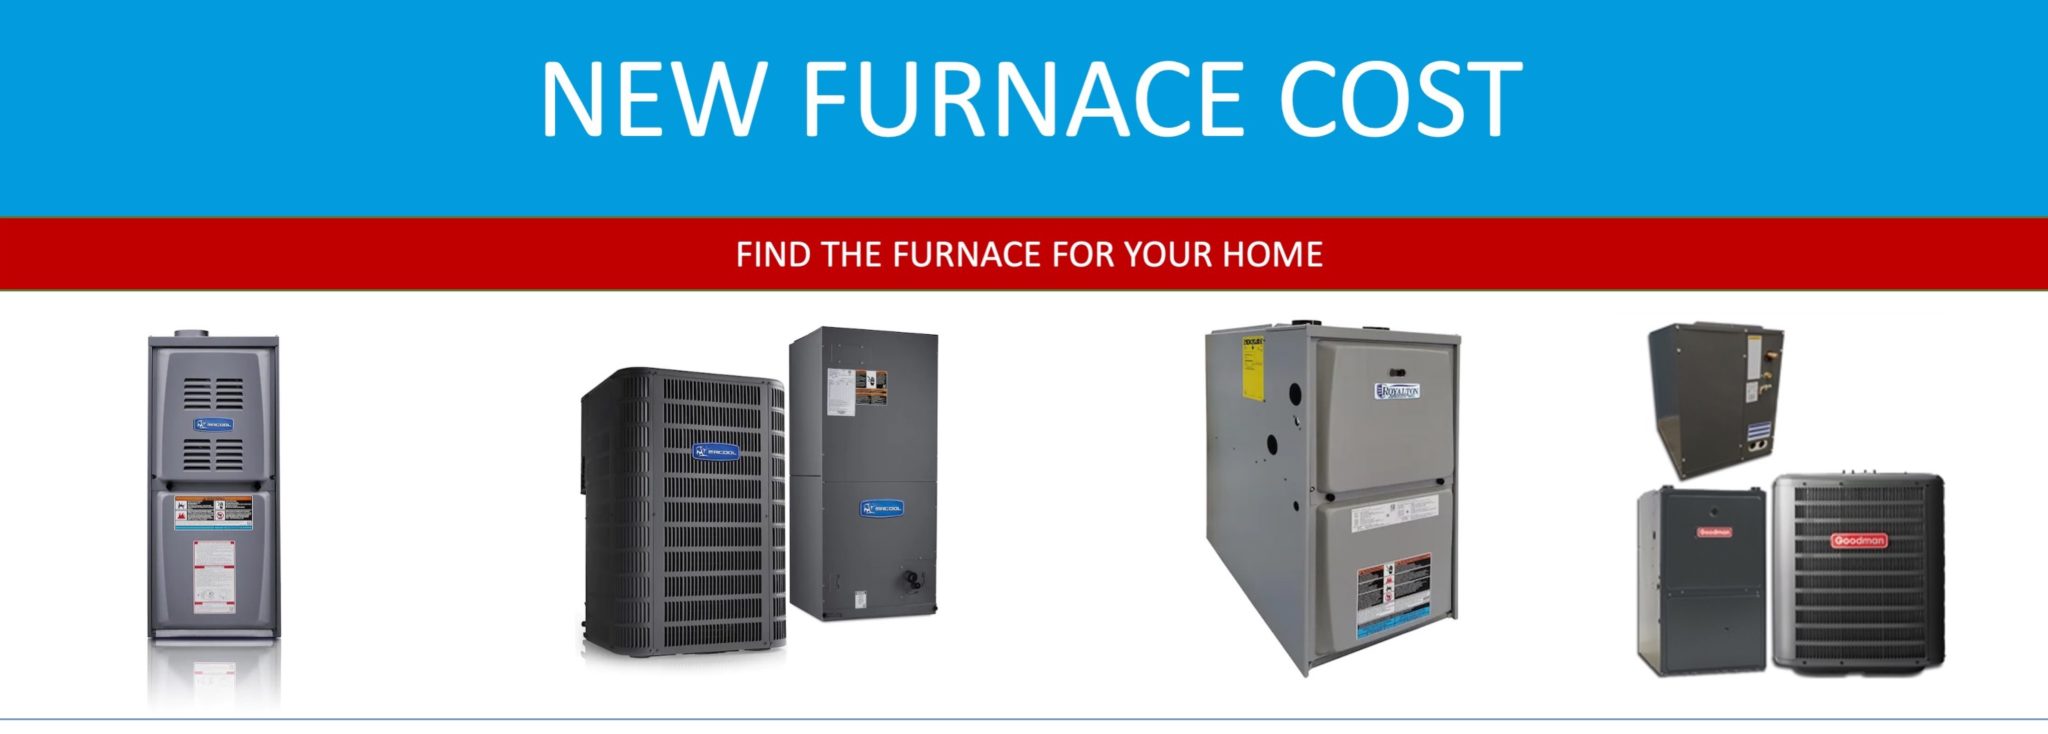 How Much Does It Cost to Install a New Furnace?